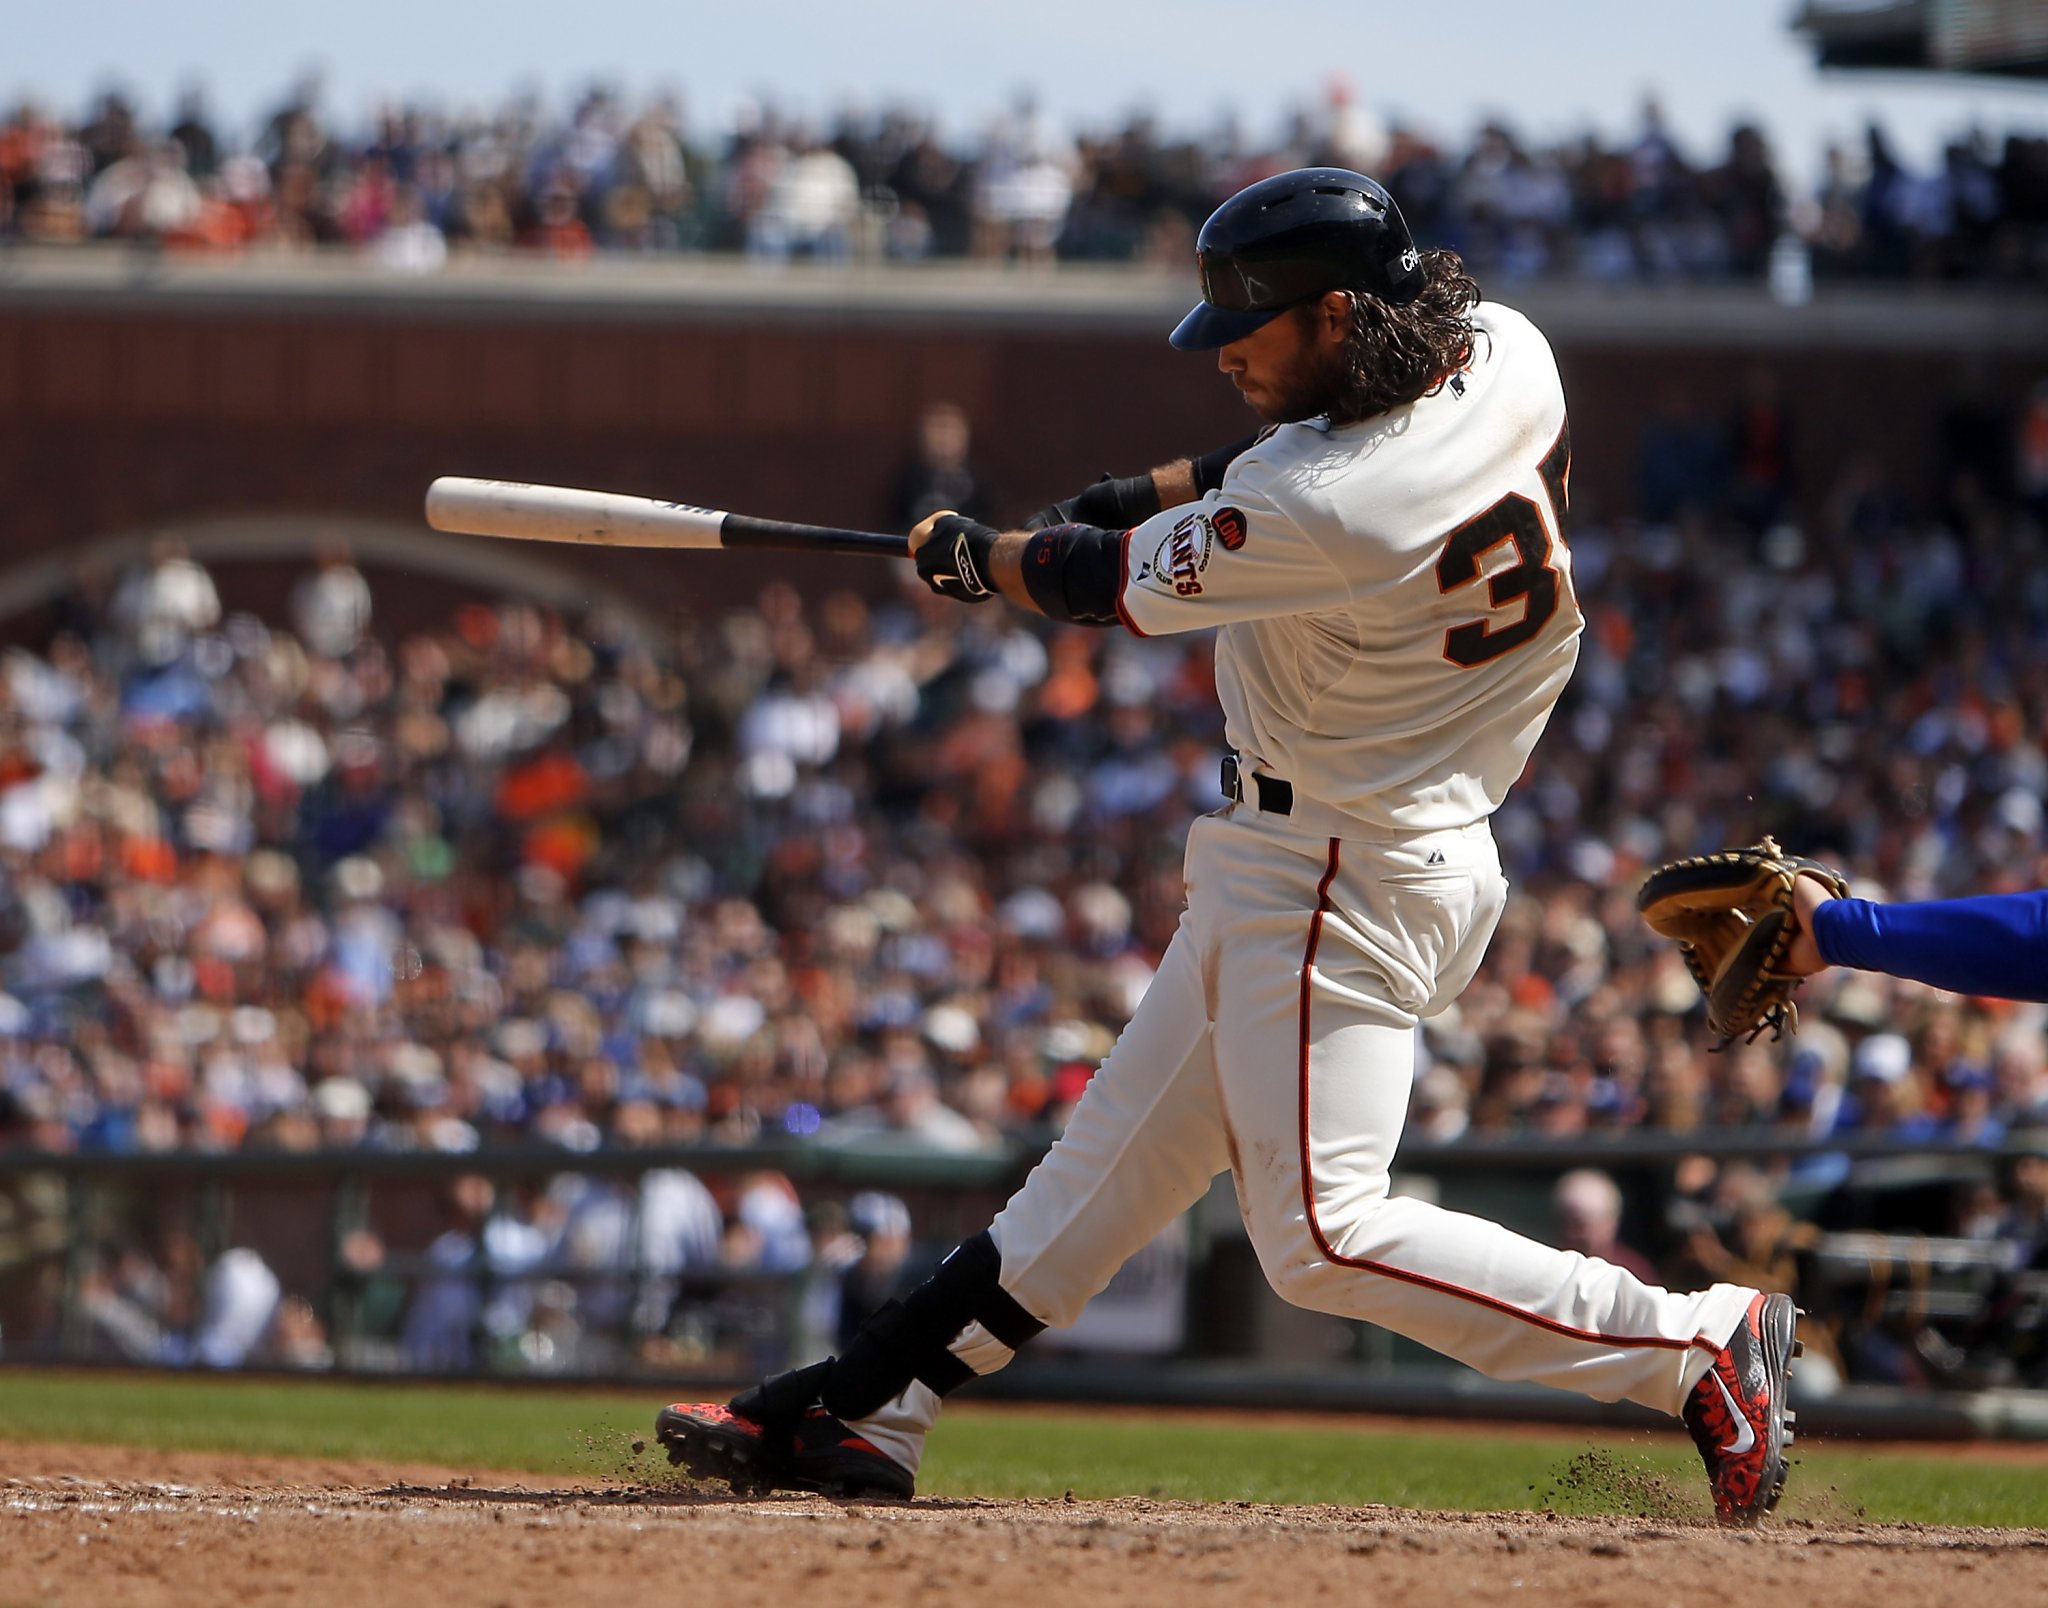 Look who leads Giants in RBIs: Brandon Crawford